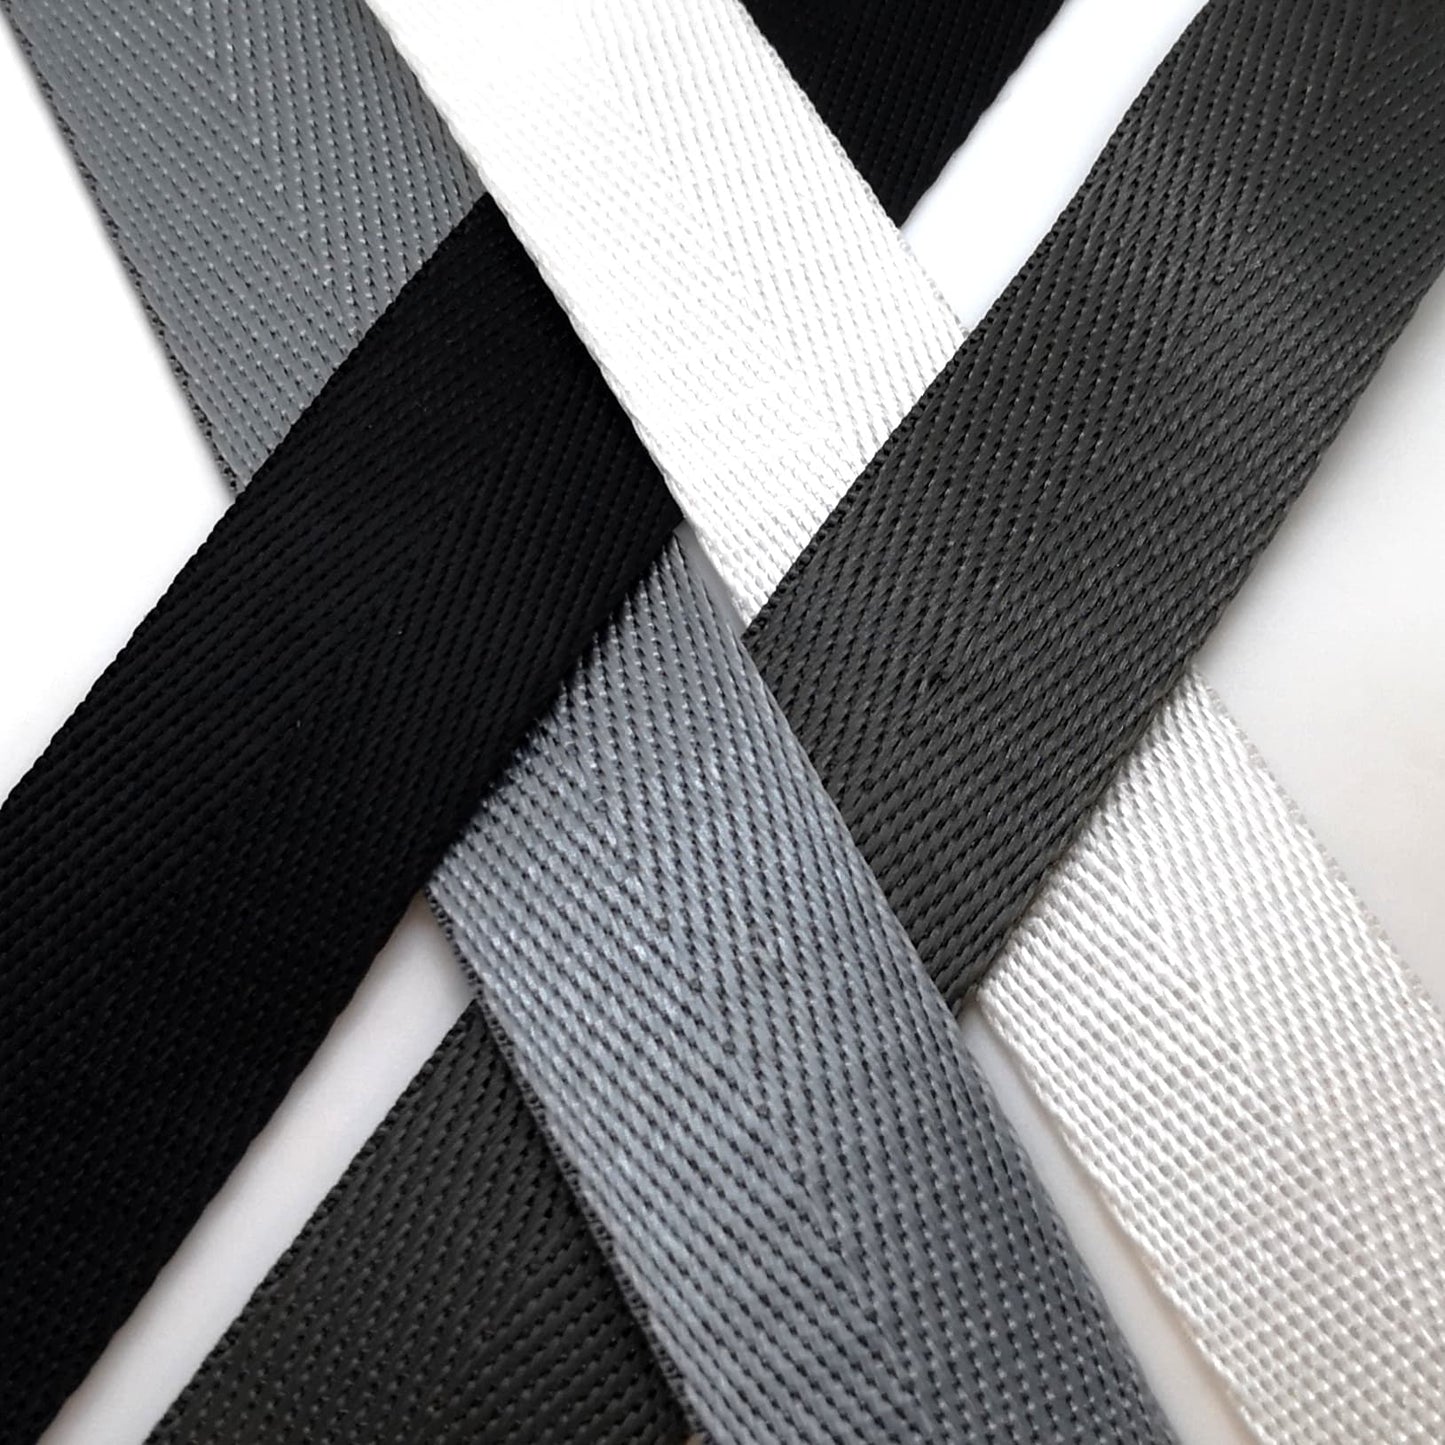 1" Wide Webbing -Solid Color - CHARCOAL